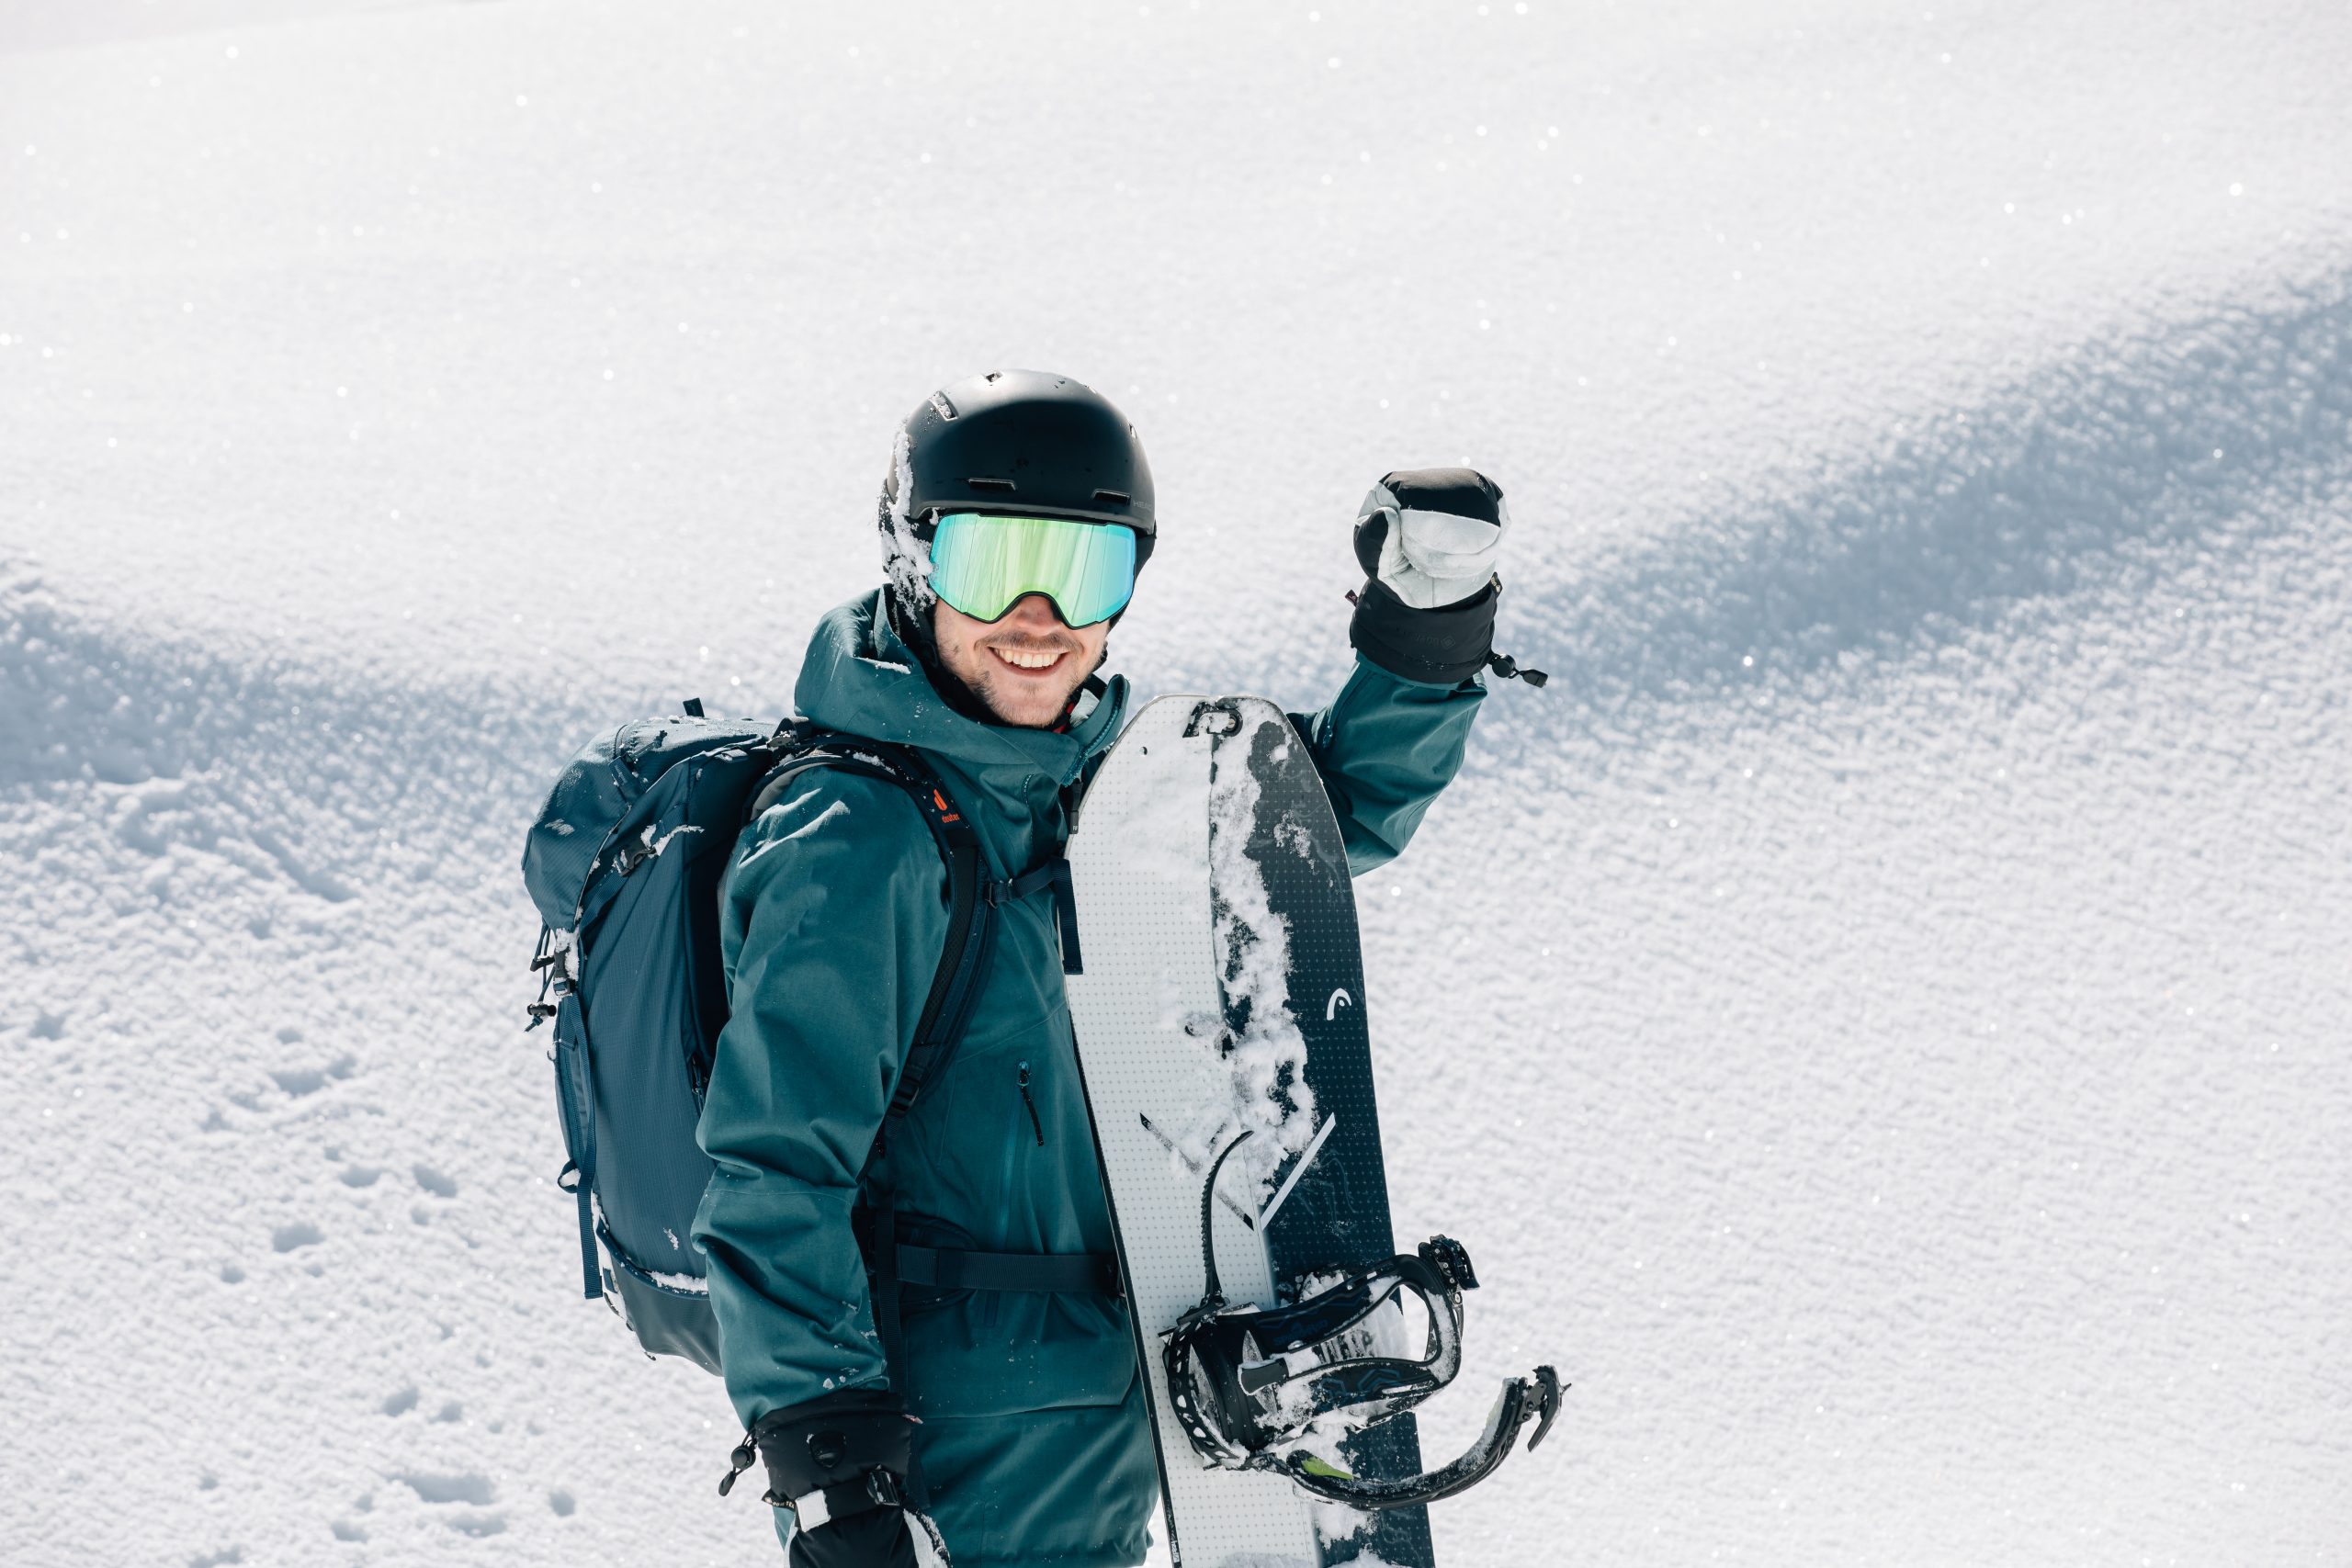 GEAR] Protection for Skiing: What Protection Do I Need? - InTheSnow